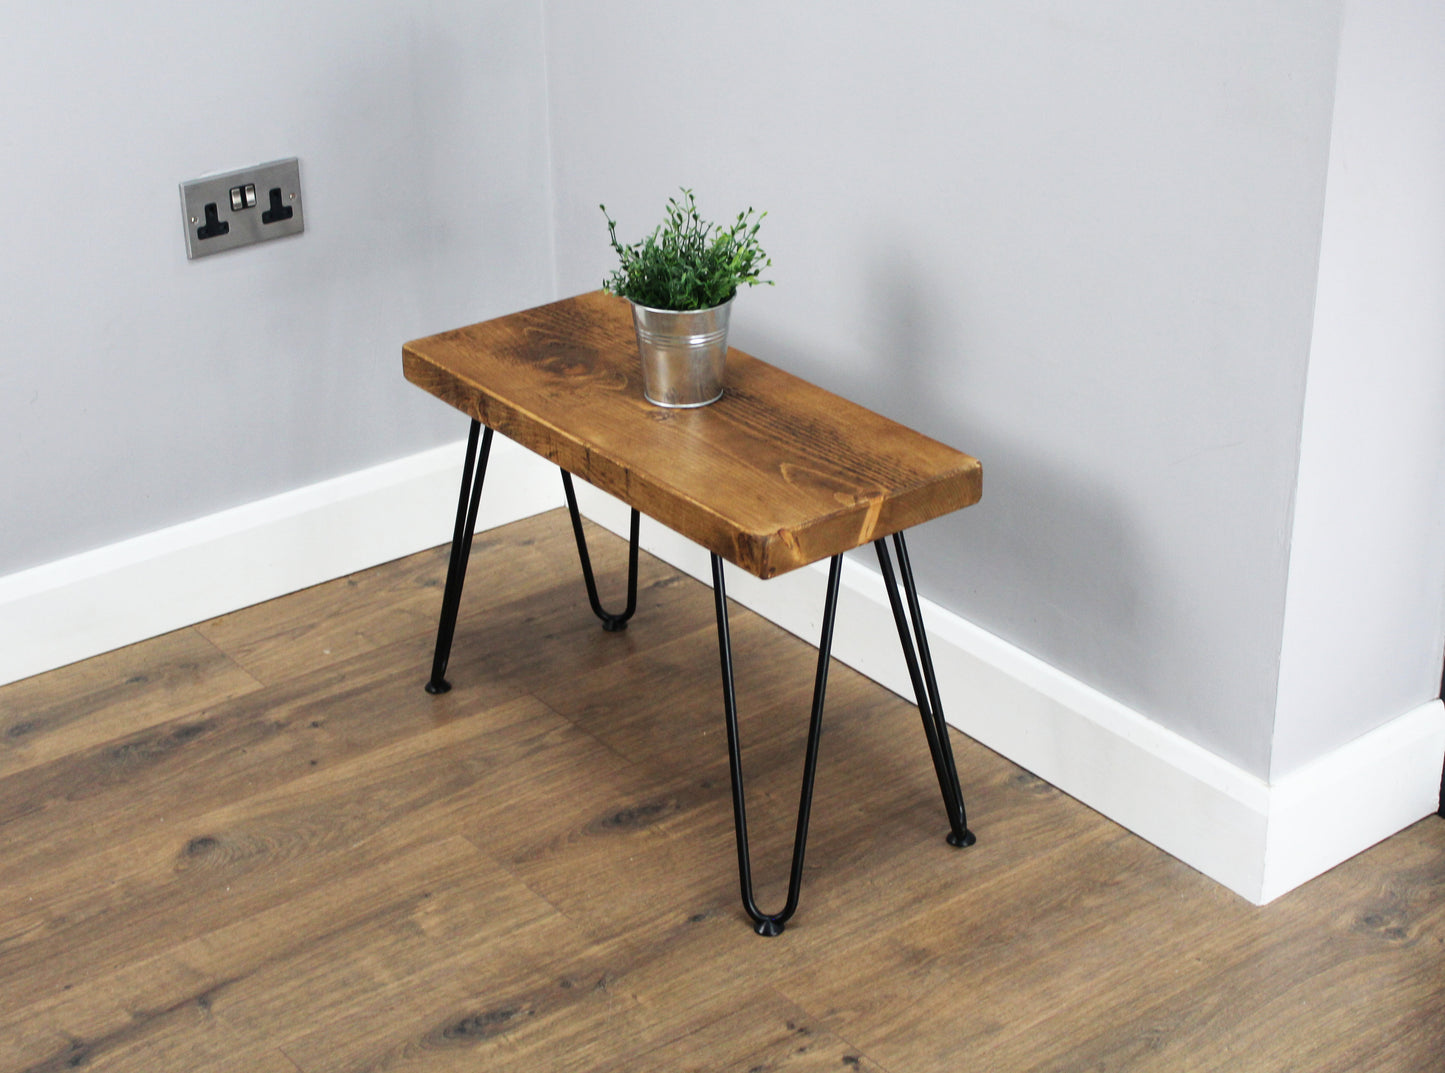 Minimalist Side Table with Hairpin Legs